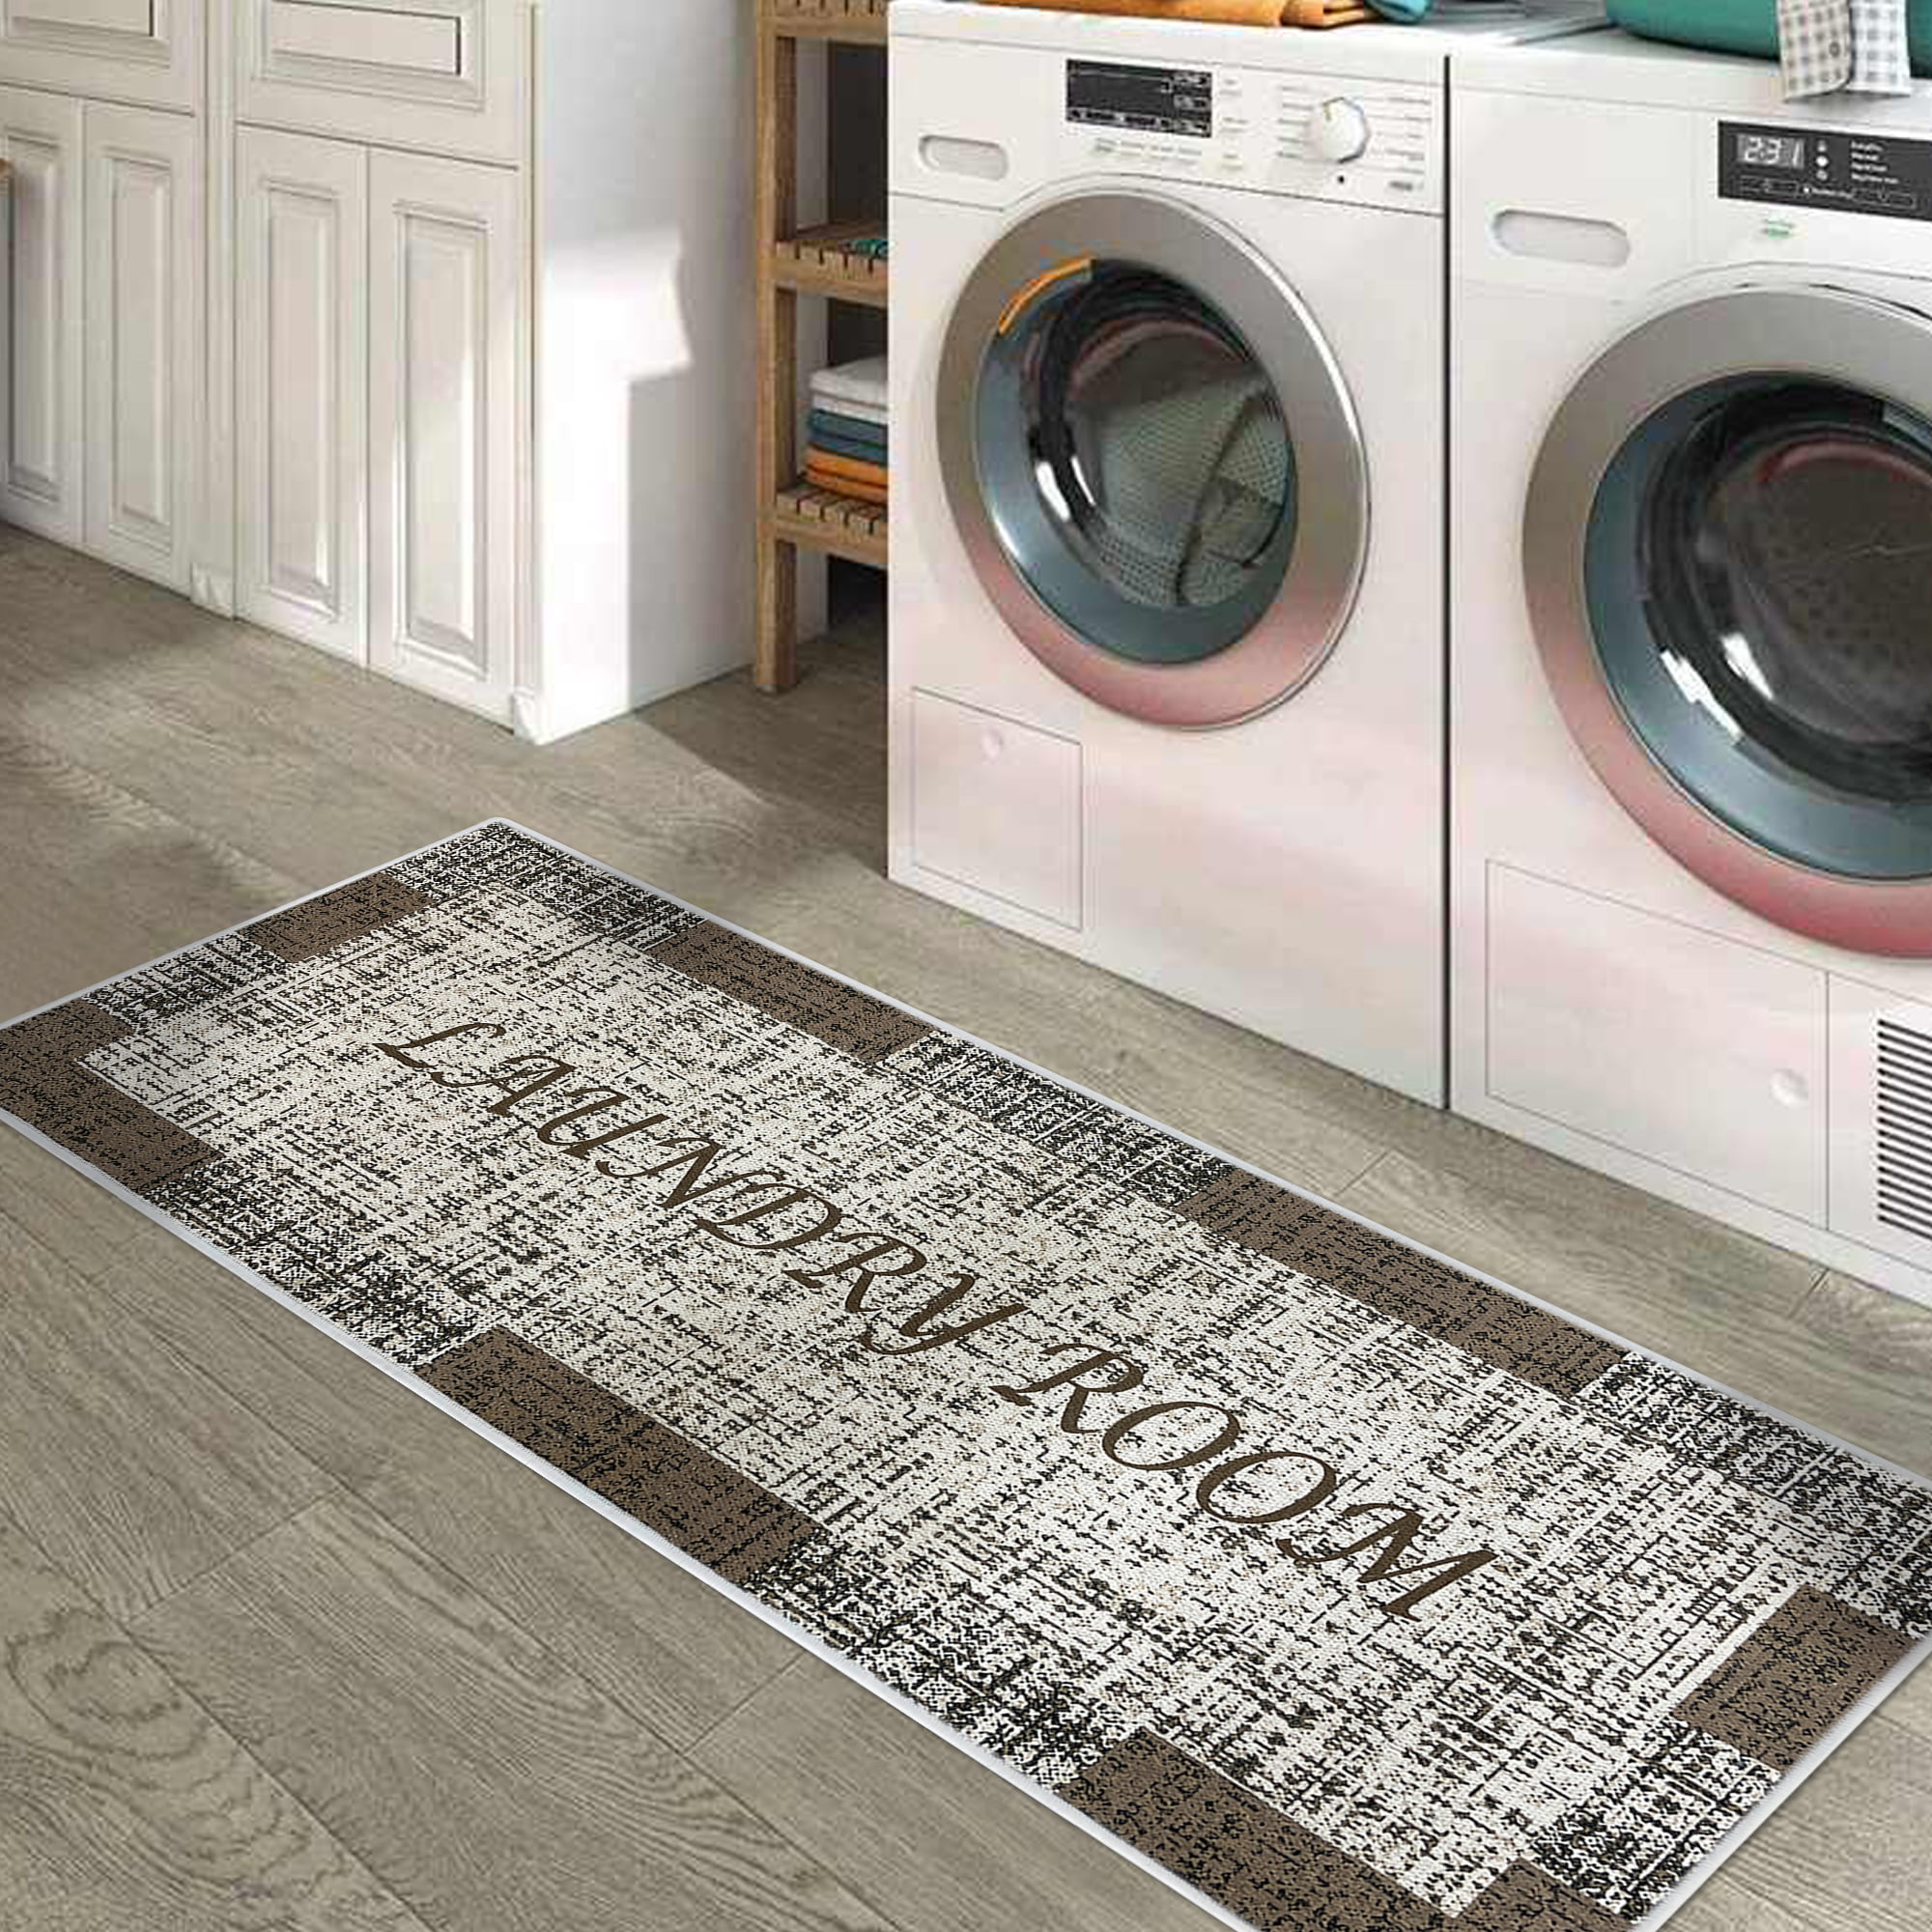 Sussexhome Non-Skid Thin Area Rugs for Laundry Room, Entryway, Bathroom and Kitchen - 20 x 31 Inches Floor Mat - Geometric-Gray&Teal